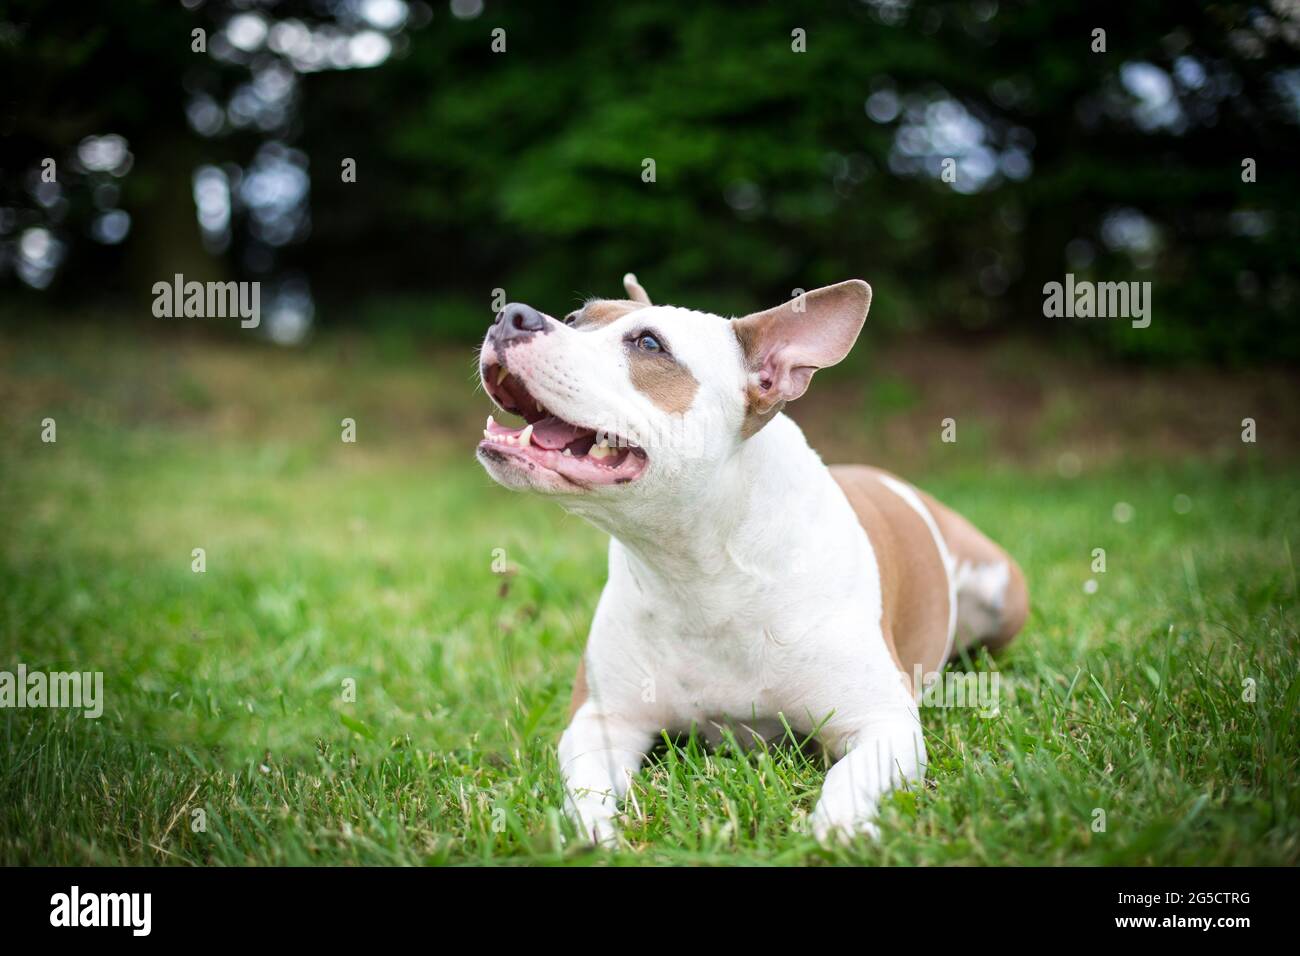 Blue fawn American Staffordshire Terrier Stock Photo - Alamy